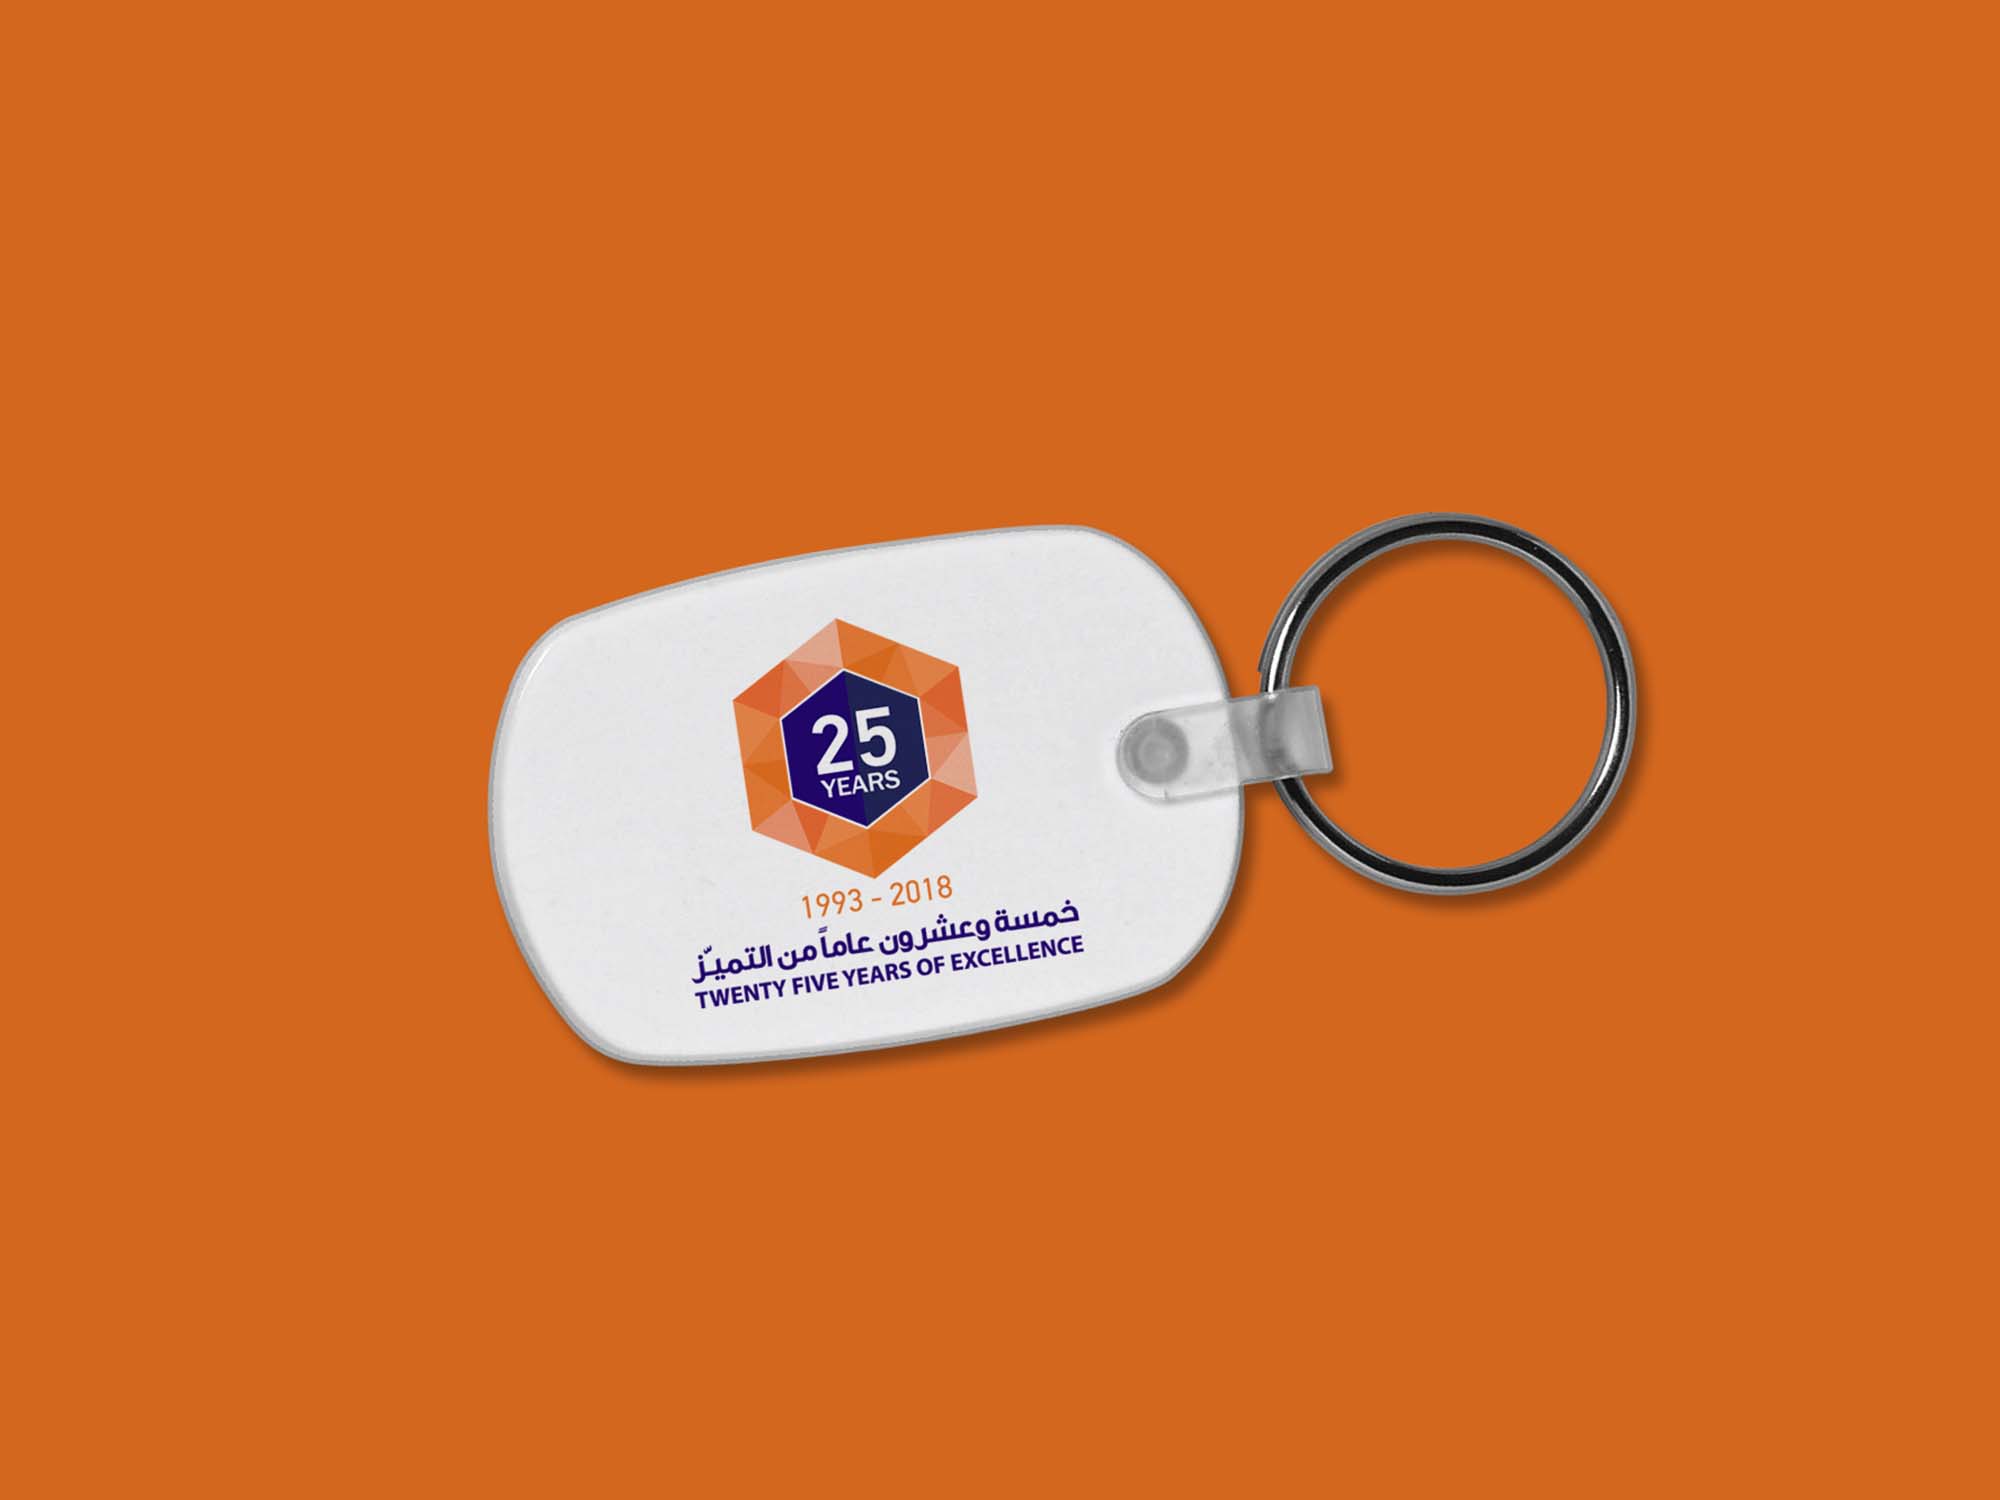 Download New Keychain PSD Mockup (Free) by Design Bolts